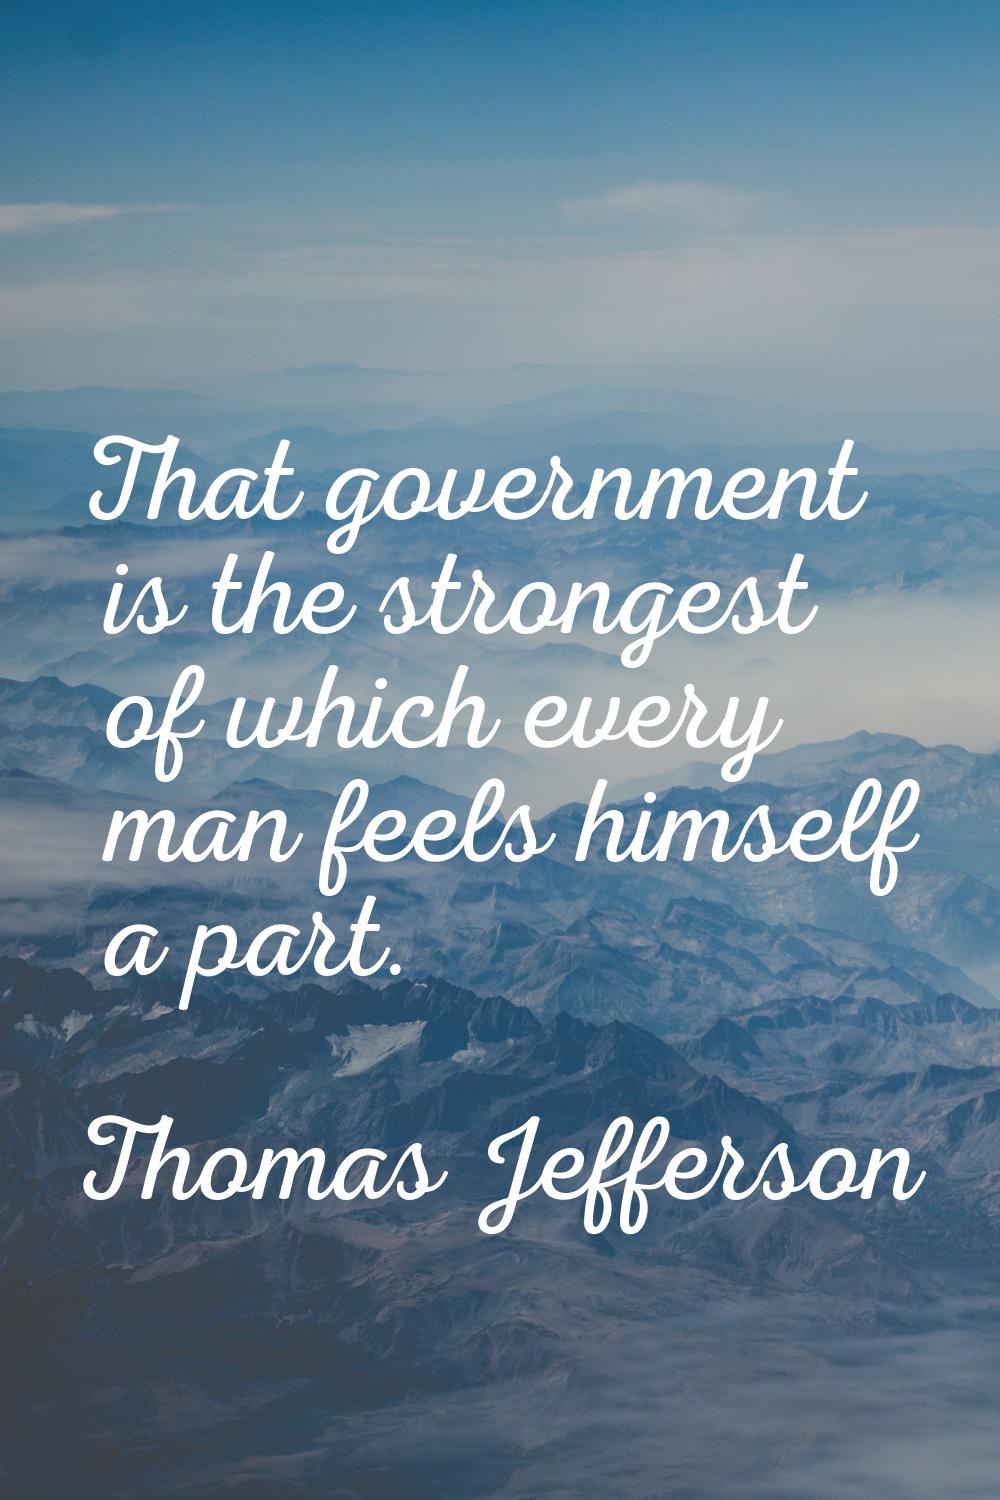 That government is the strongest of which every man feels himself a part.